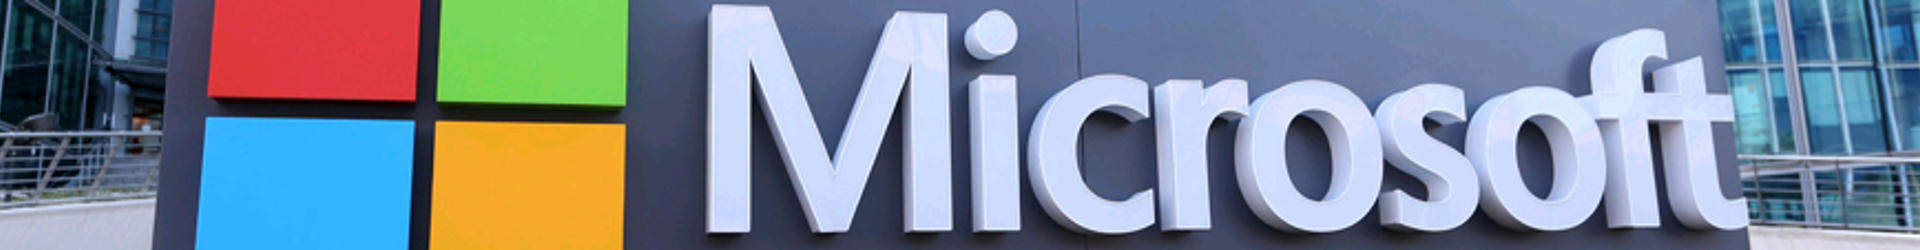 The Mircosoft building sign 